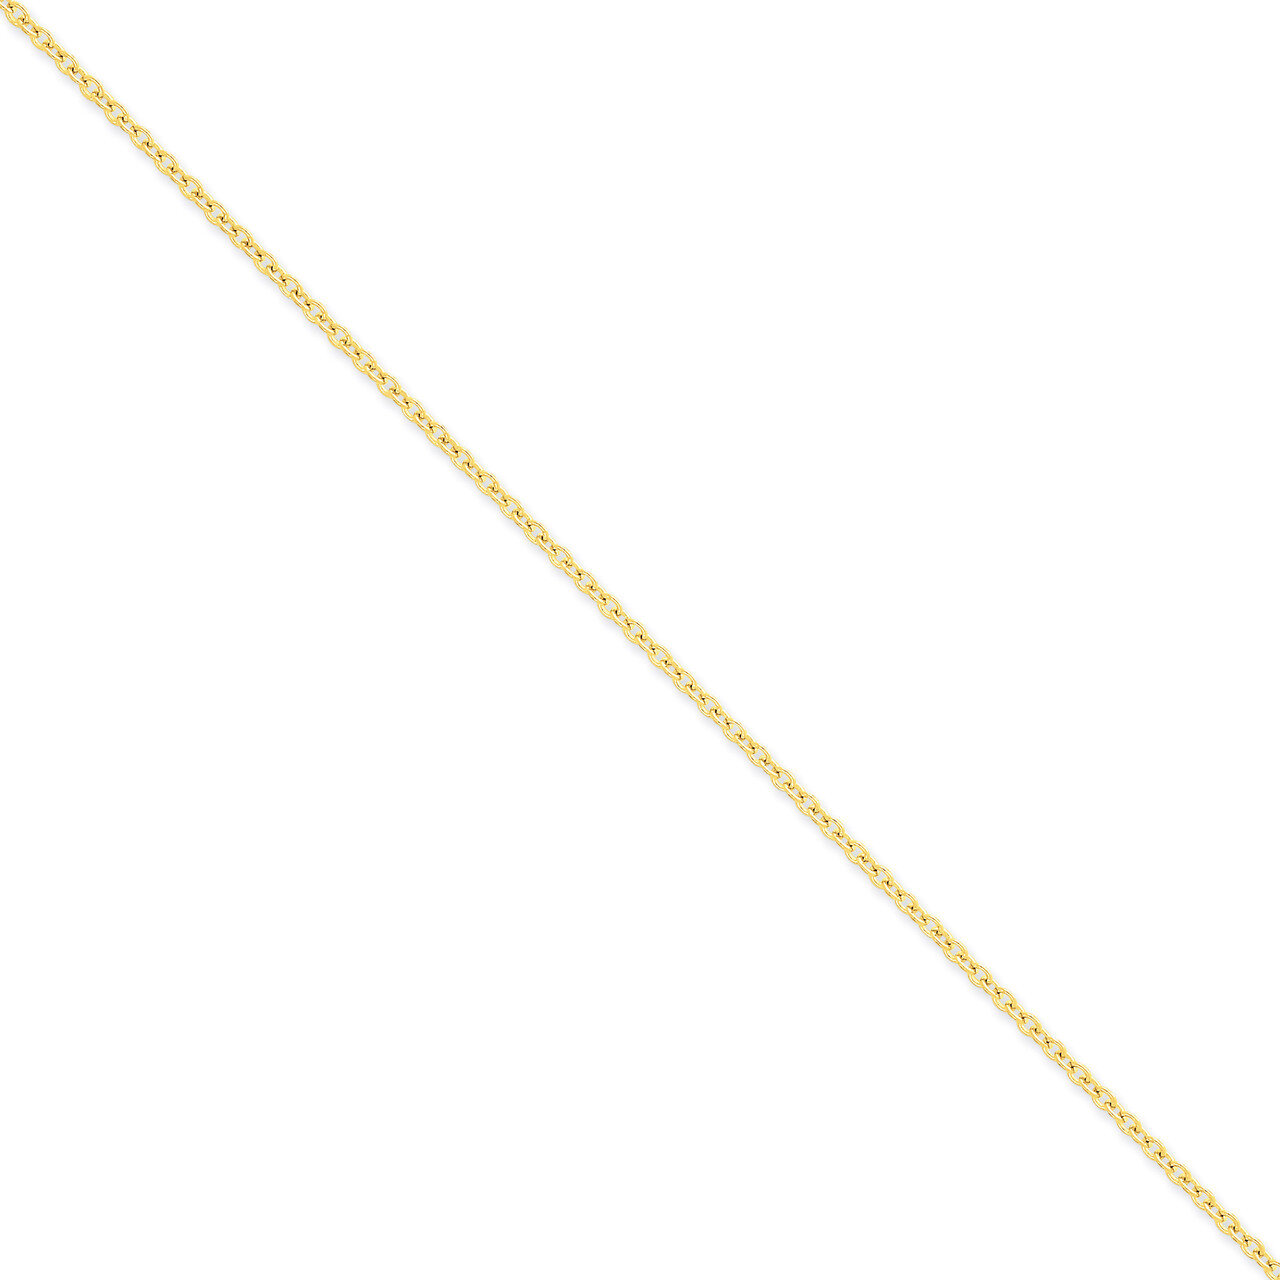 2.4mm Cable Chain 24 Inch 14k Gold PEN217-24